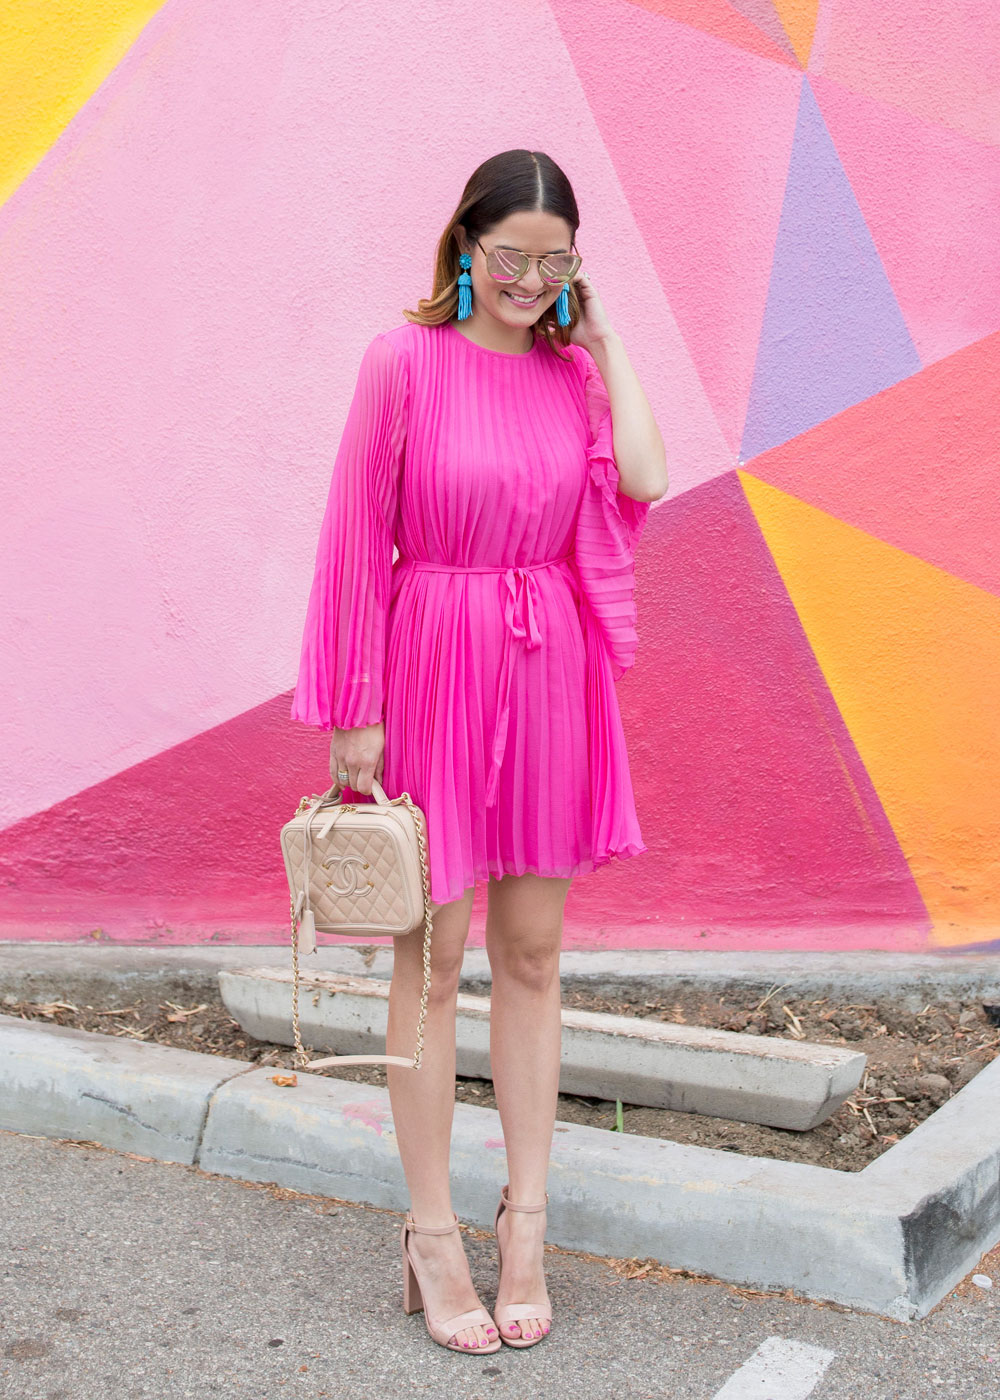 ASOS Pink Pleated Dress